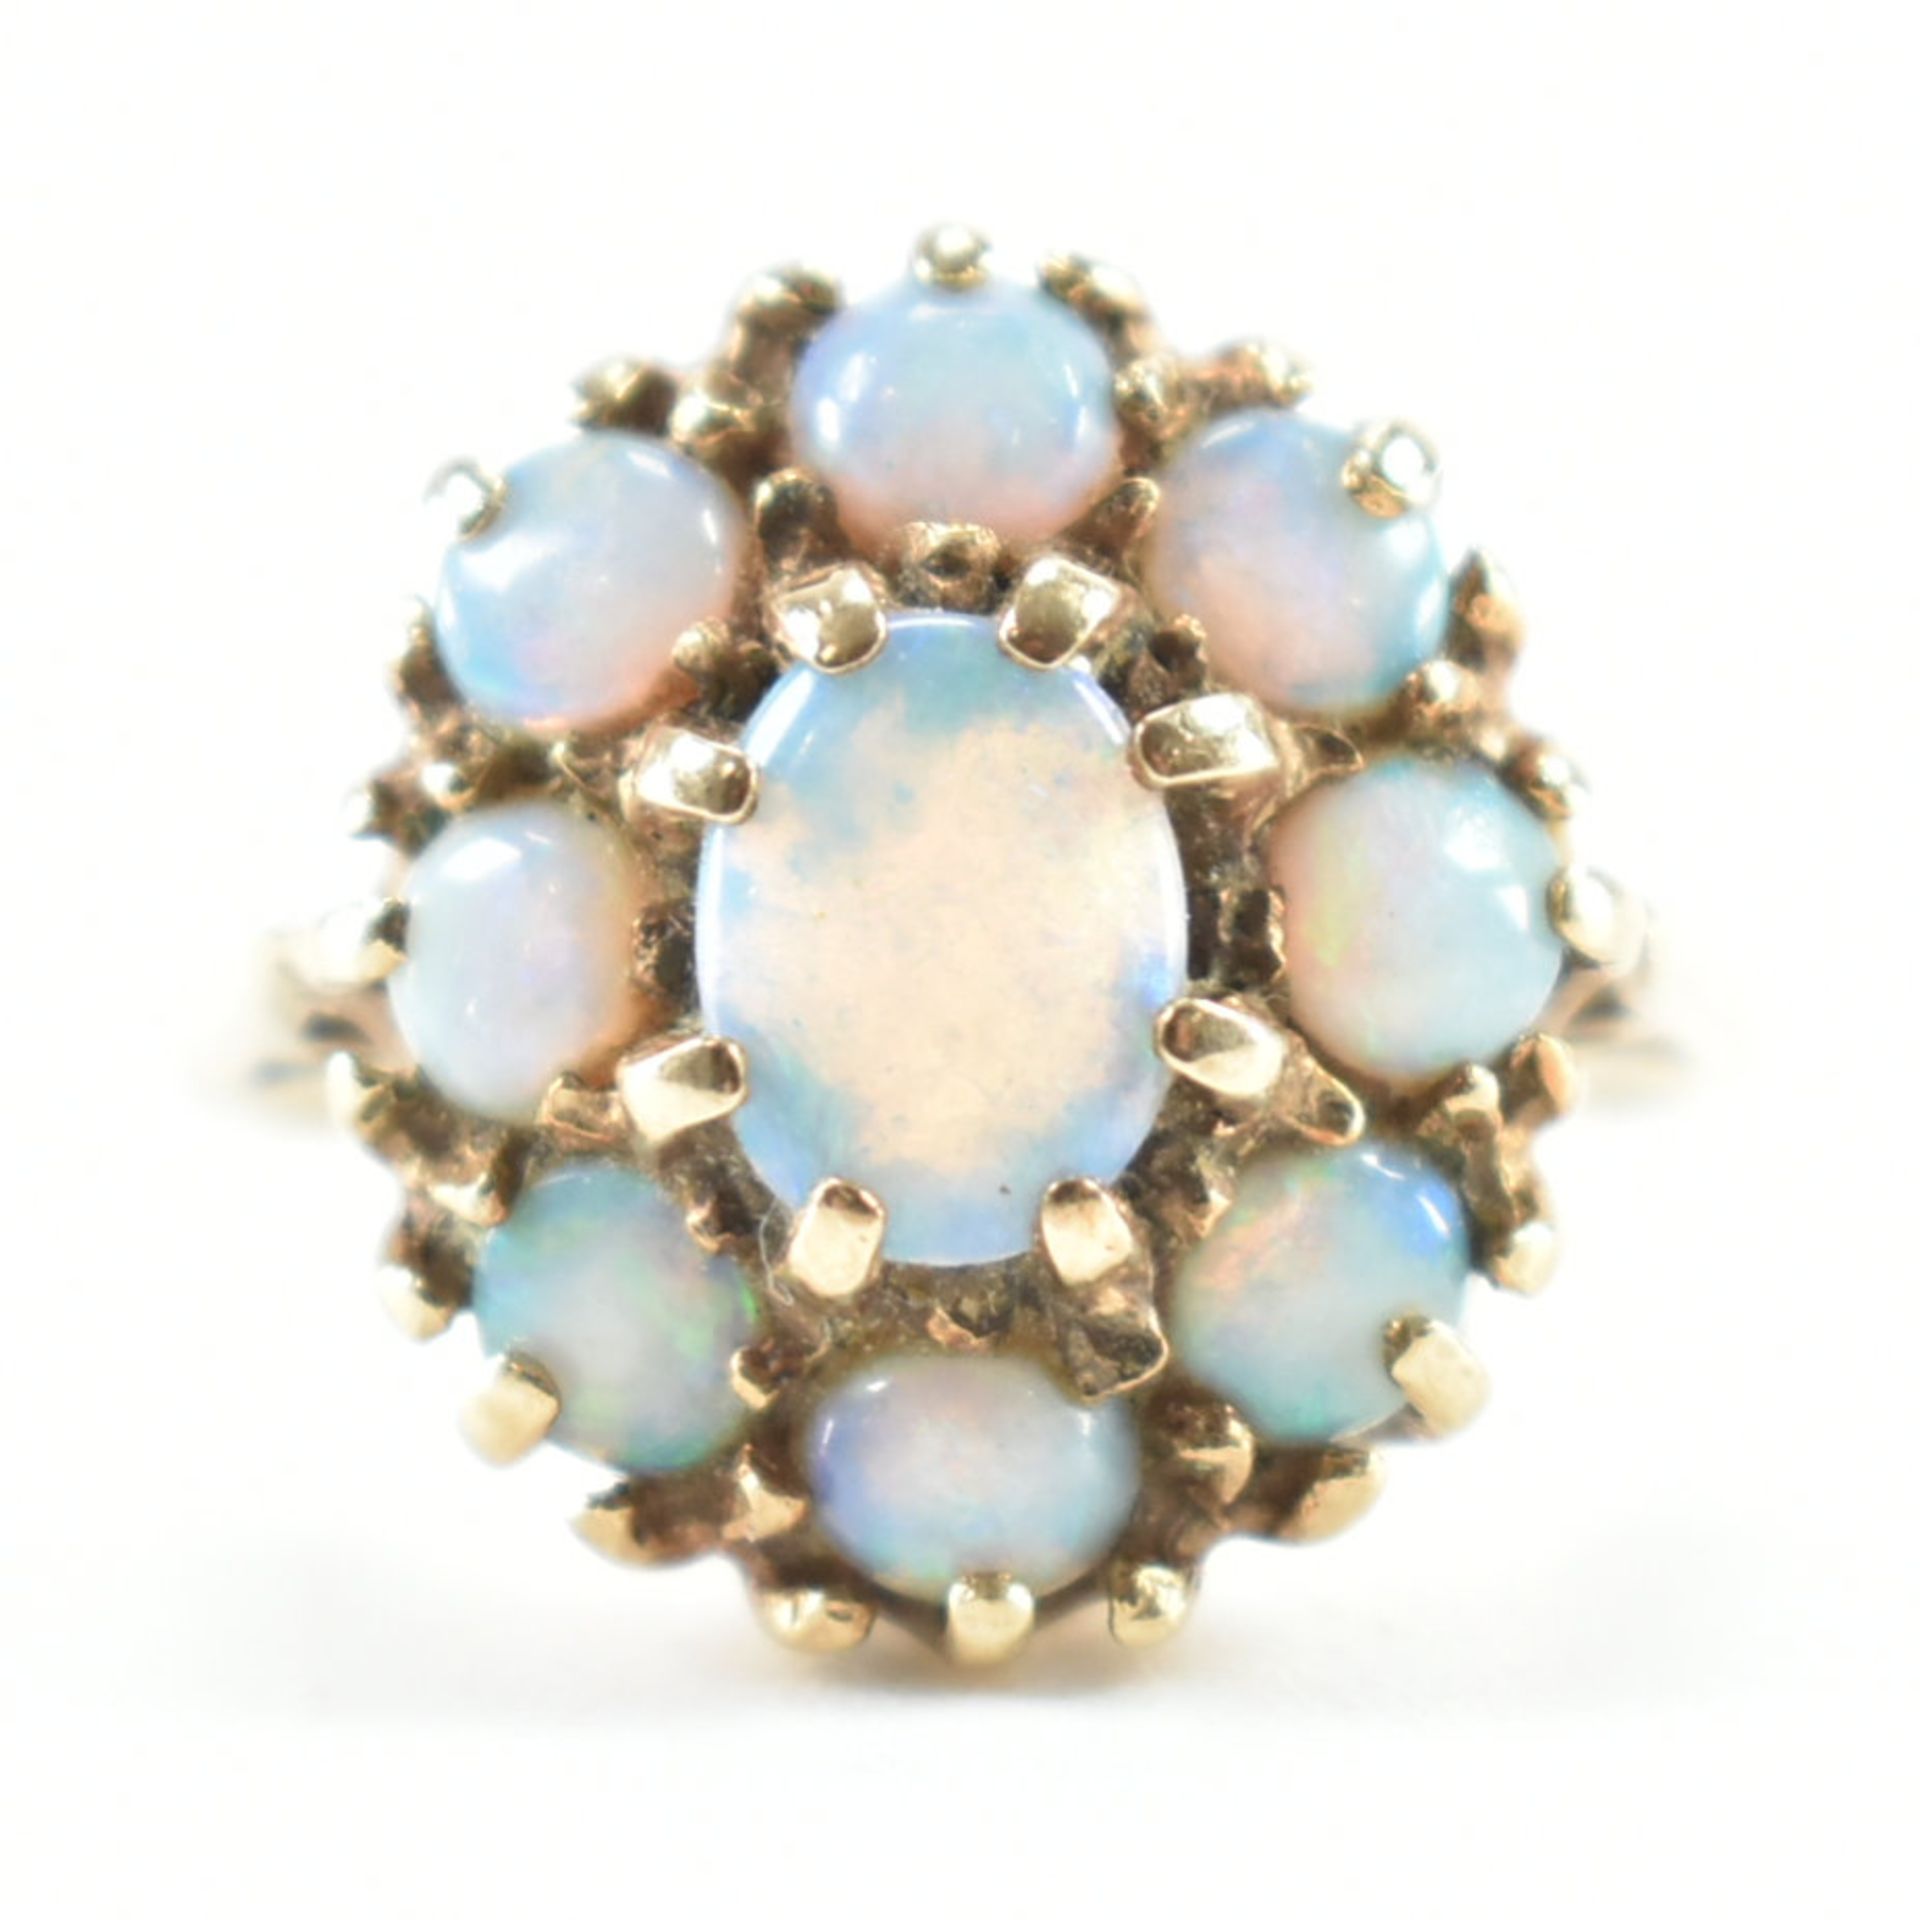 HALLMARKED 9CT GOLD & OPAL CLUSTER RING